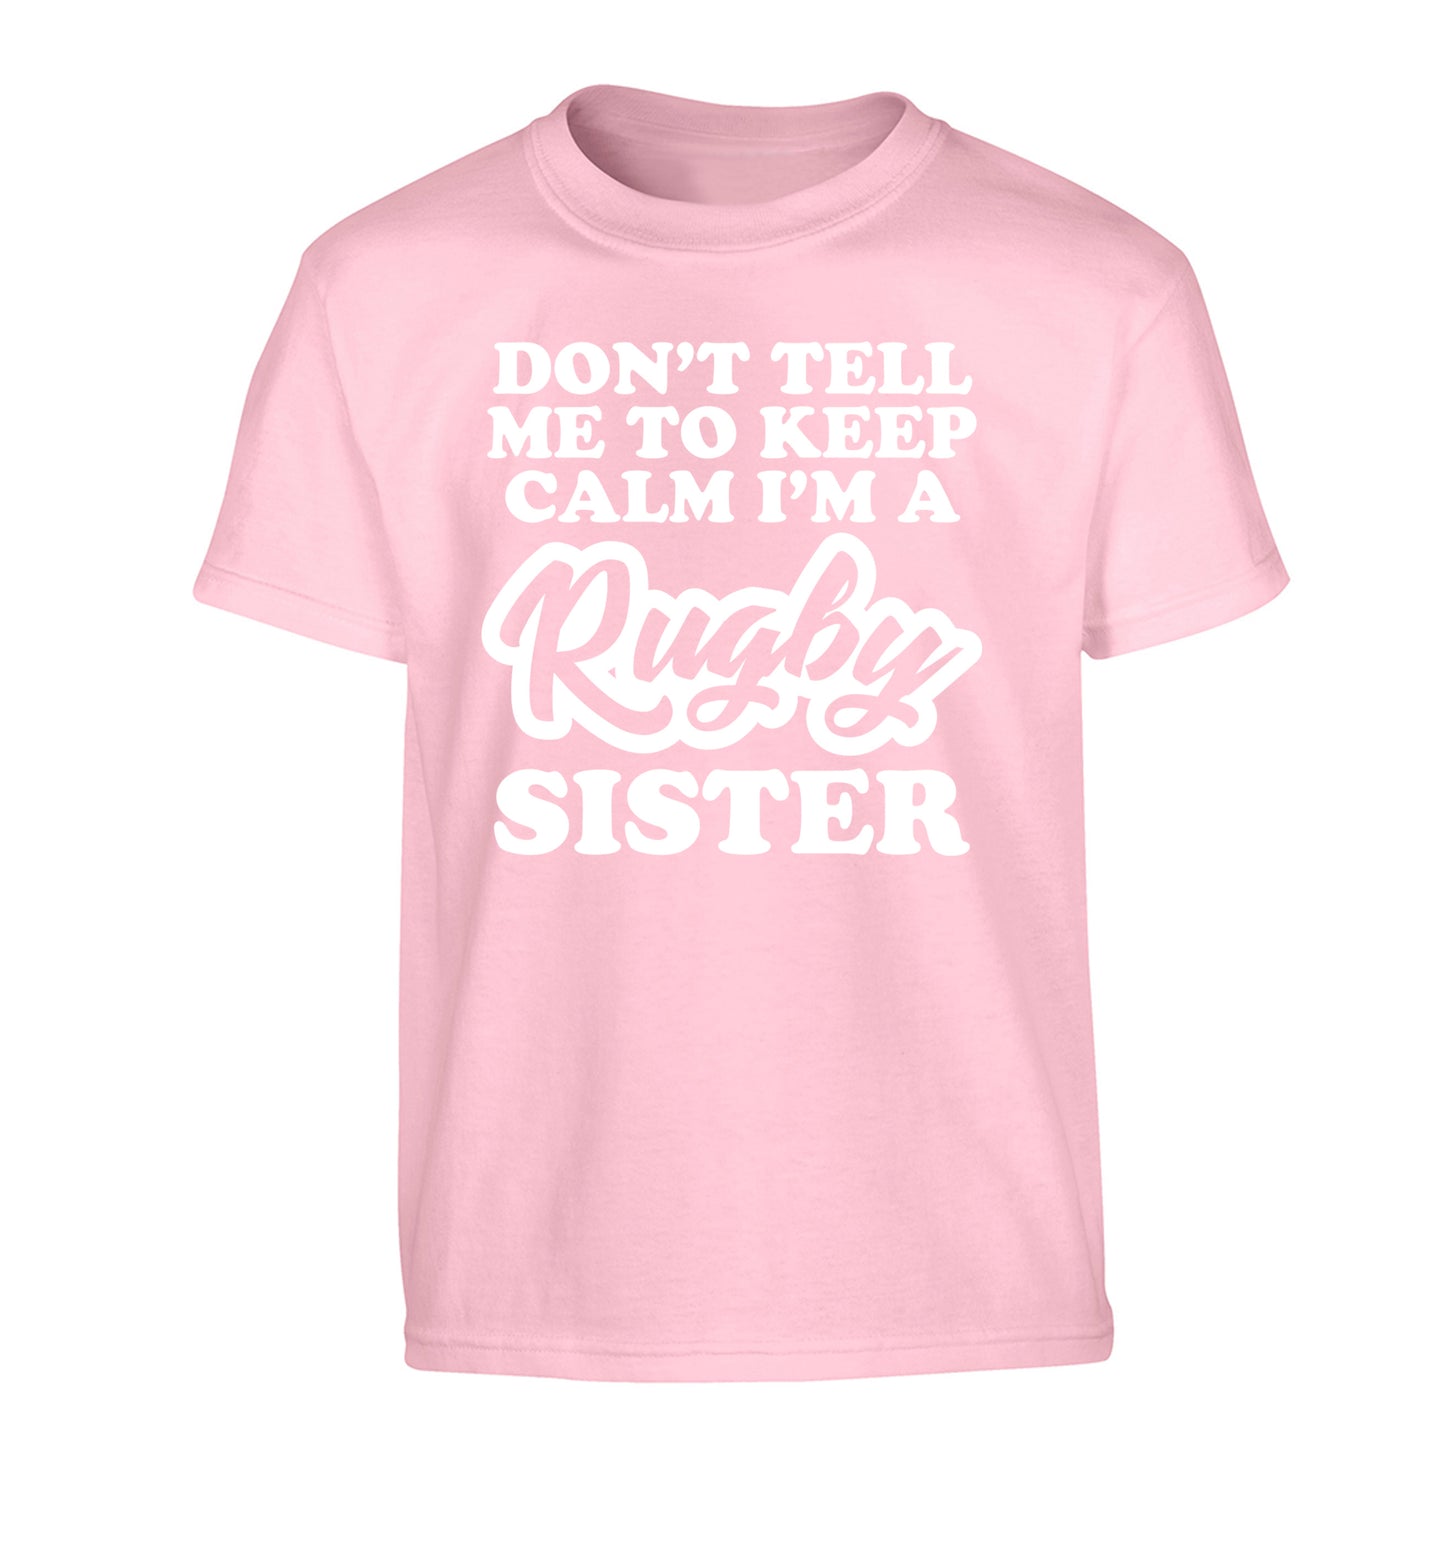 Don't tell me keep calm I'm a rugby sister Children's light pink Tshirt 12-13 Years